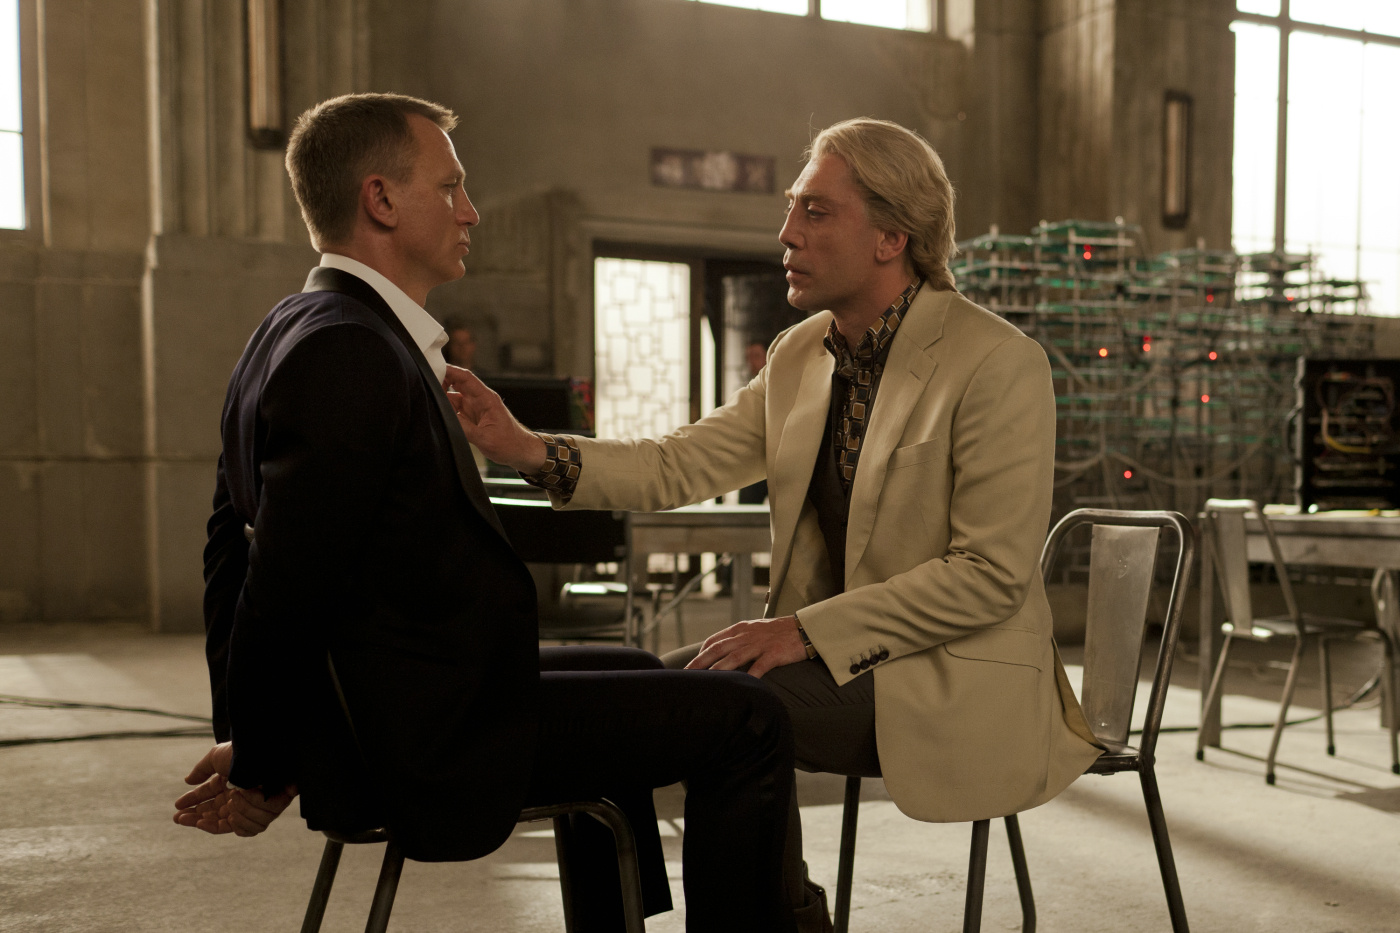 Raoul Silva and James Bond in "Skyfall" (2012)